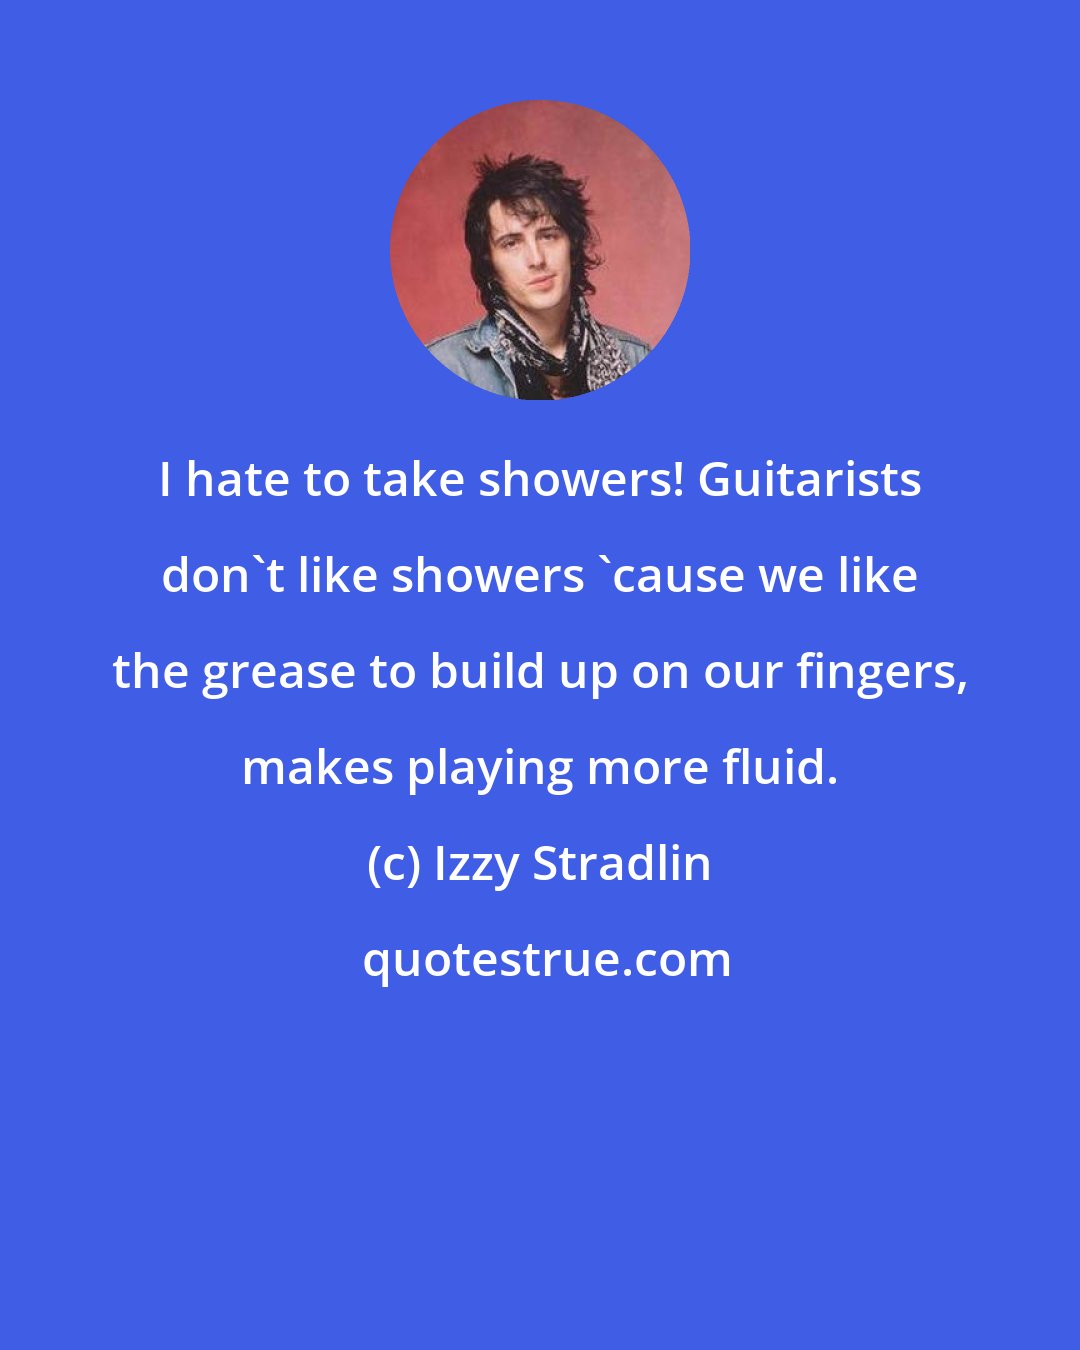 Izzy Stradlin: I hate to take showers! Guitarists don't like showers 'cause we like the grease to build up on our fingers, makes playing more fluid.